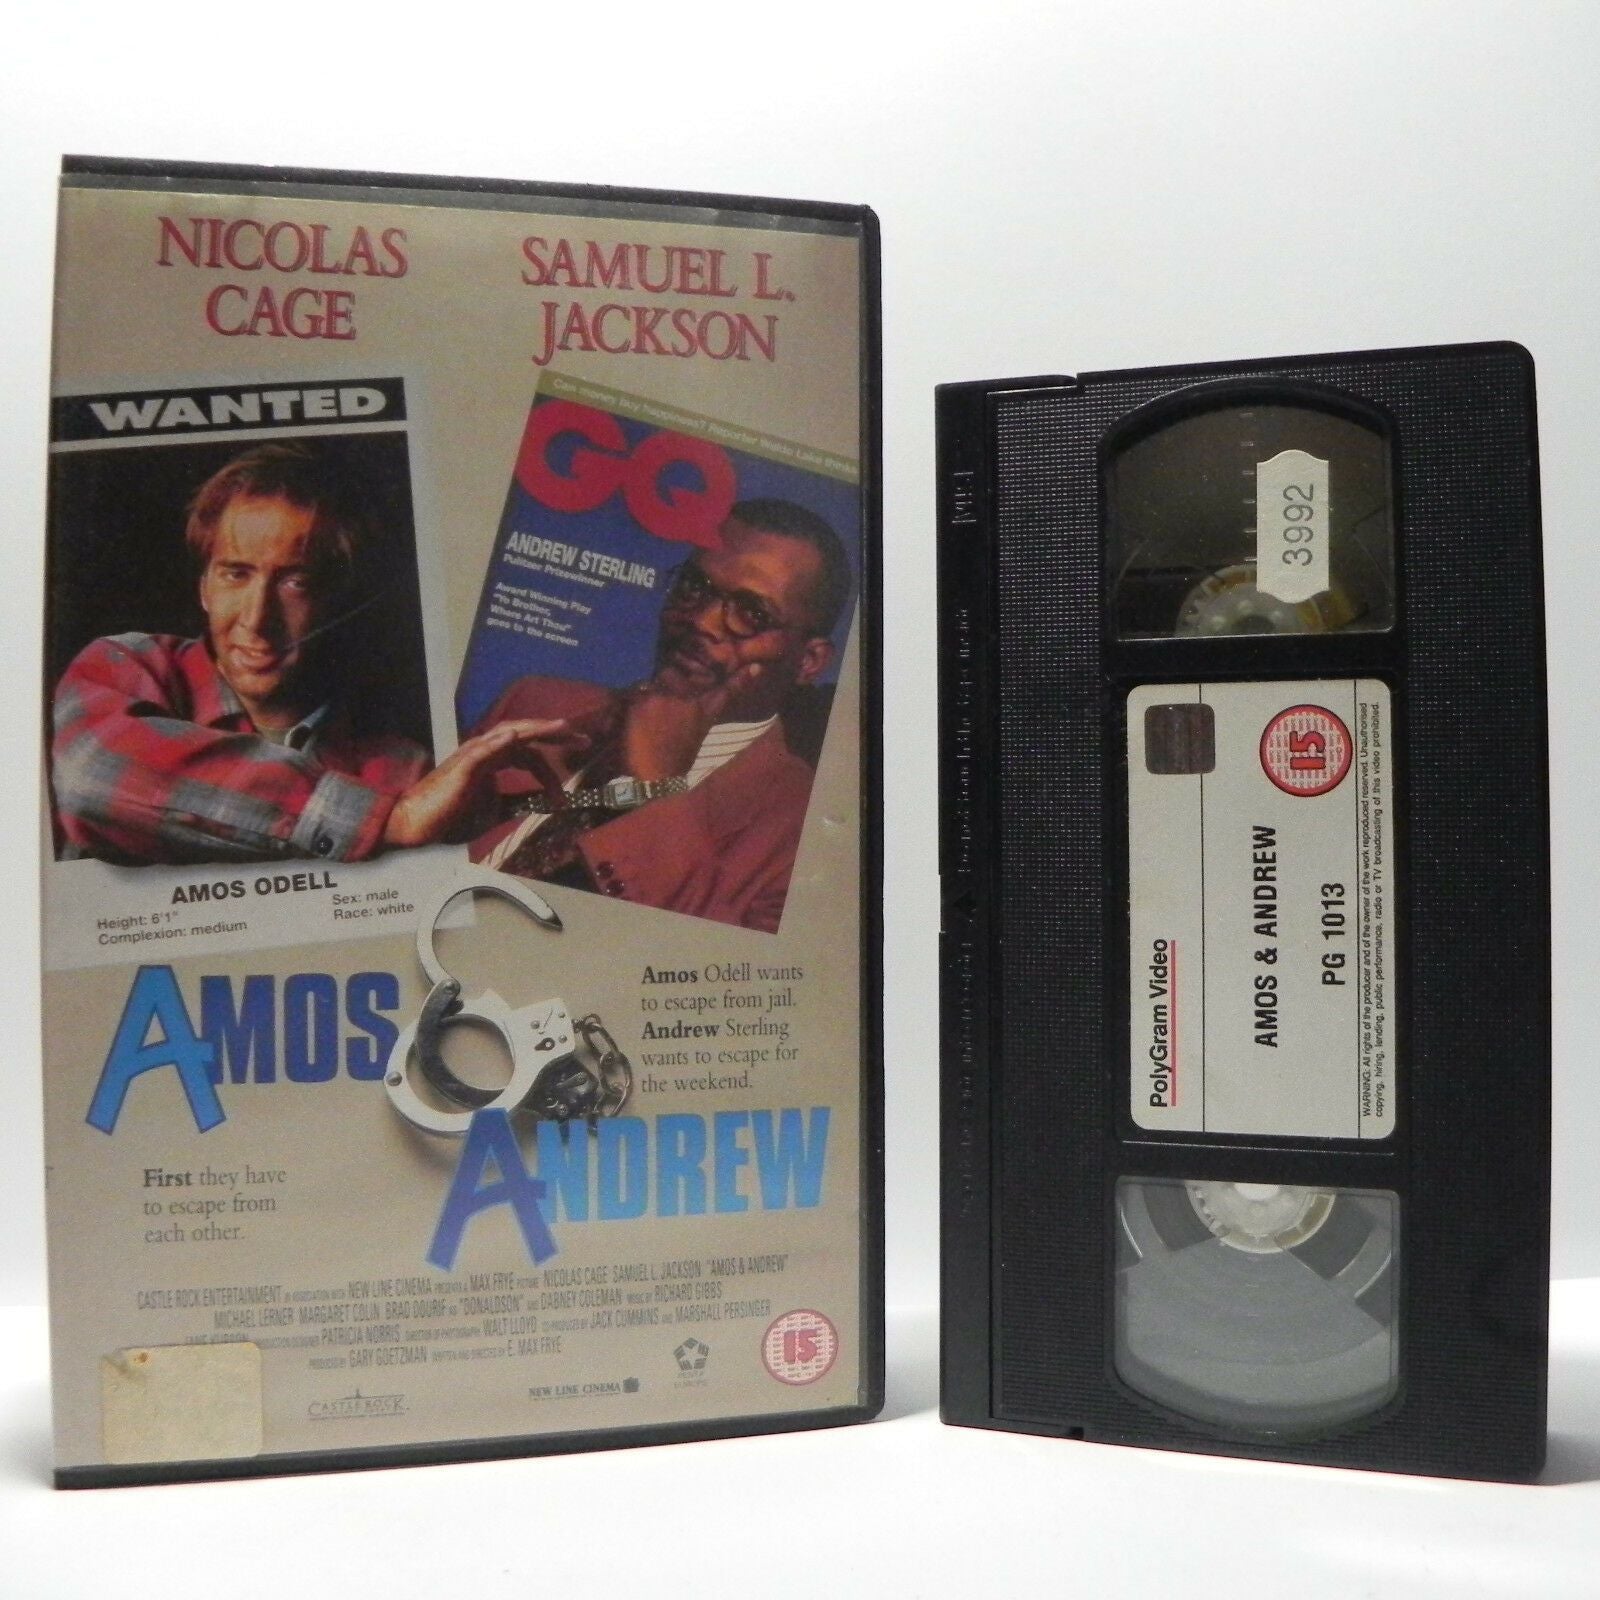 Amos And Andrew: (1993) Crime Comedy - Large Box - N.Cage/S.L.Jackson - Pal VHS-